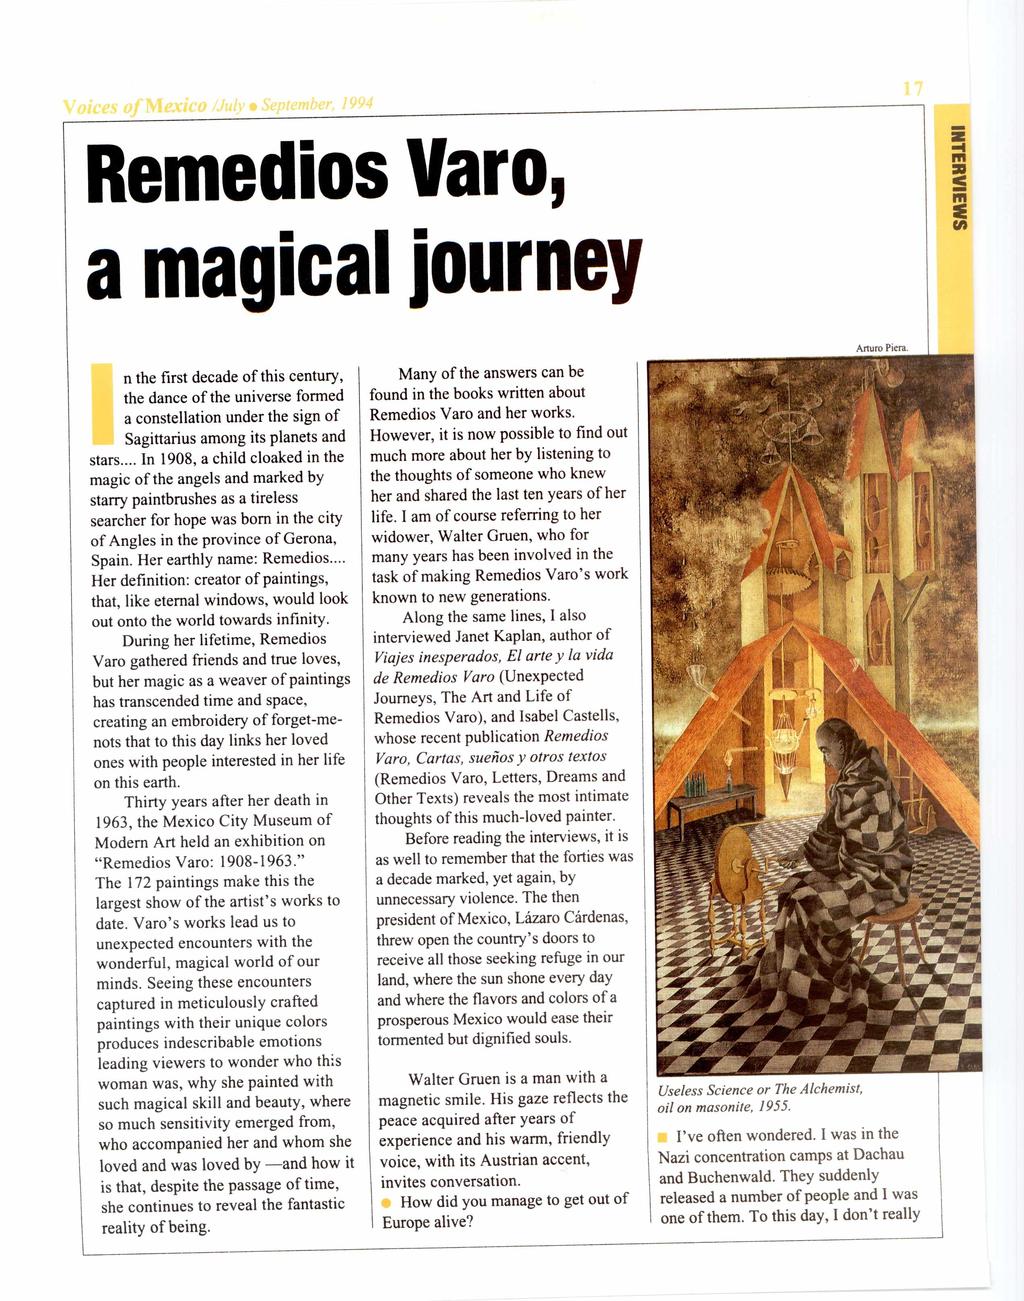 Remedios Varo, a magical journey n the first decade of this century, the dance of the universe formed a constellation under the sign of Sagittarius among its planets and stars.